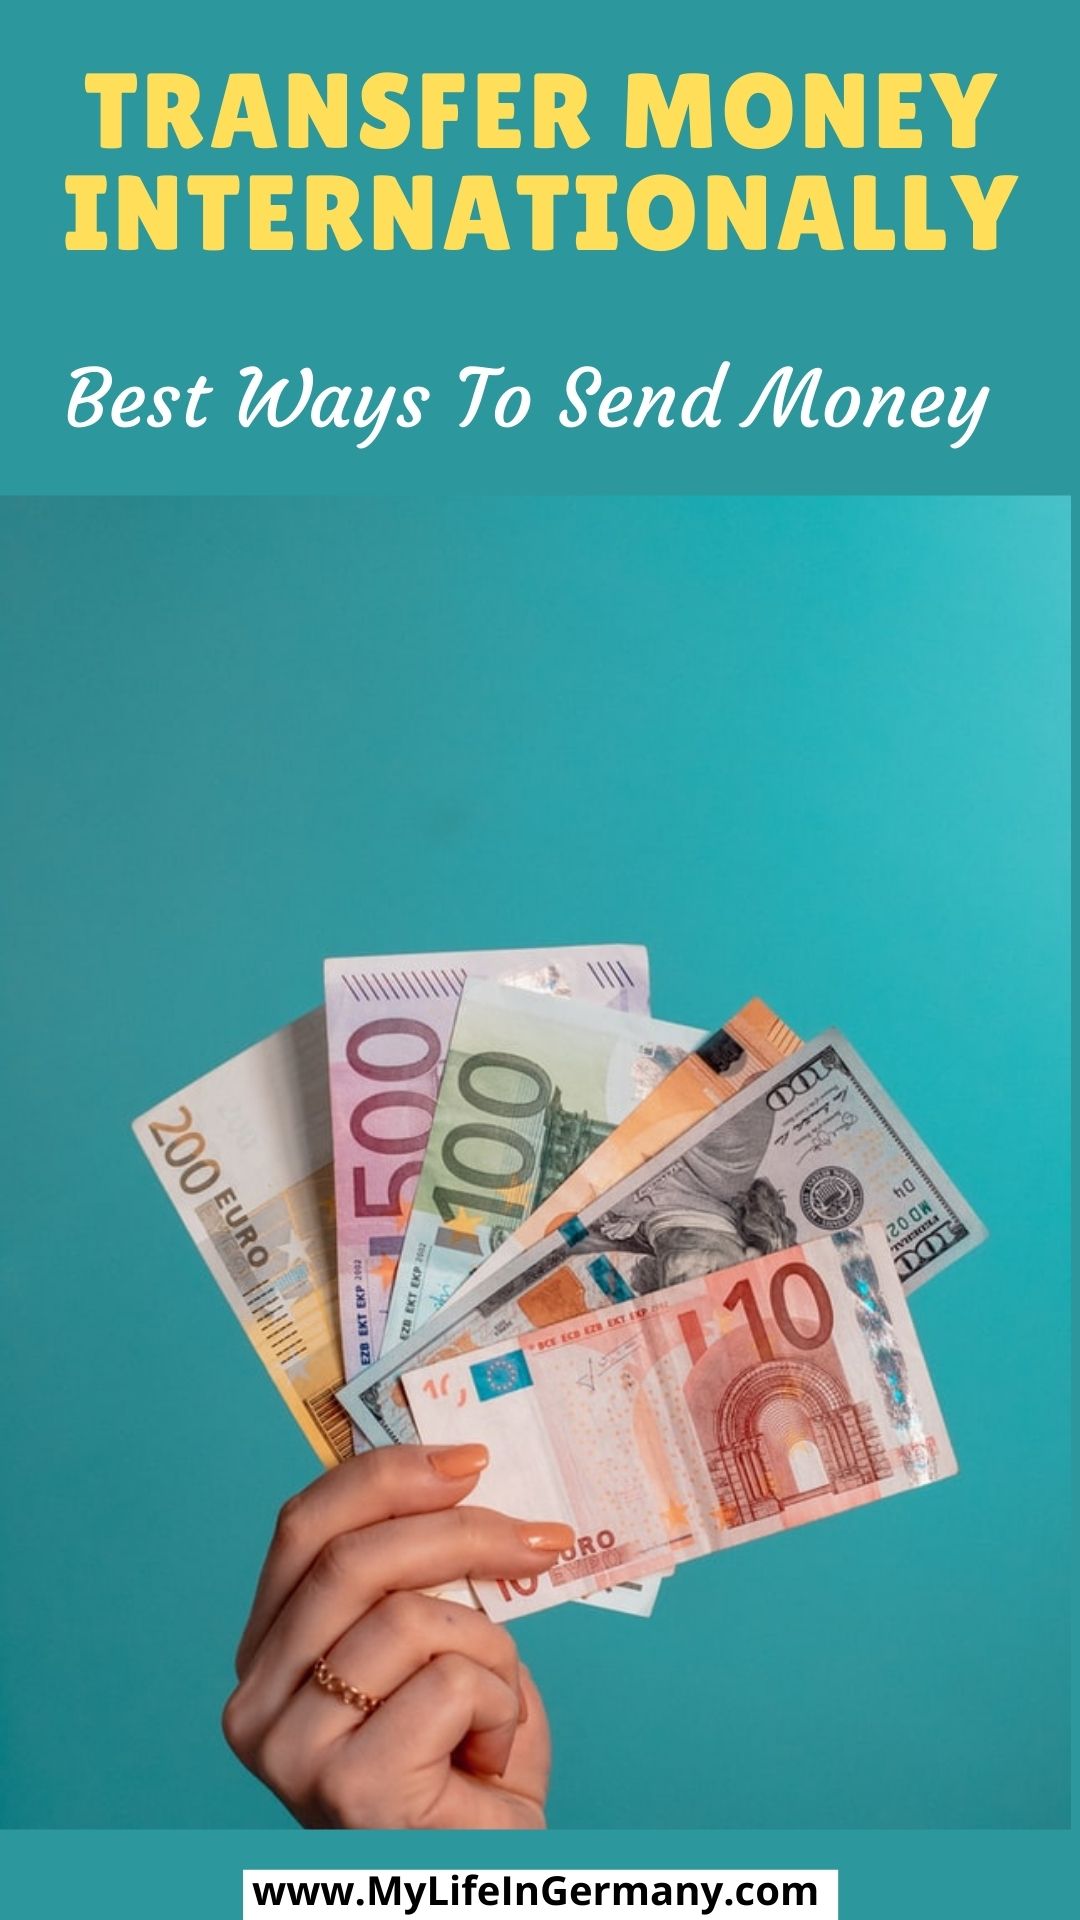 pinterest edited_transfer money internationally_best ways to send money to or from Germany_my life in germany_hkwomanabroad